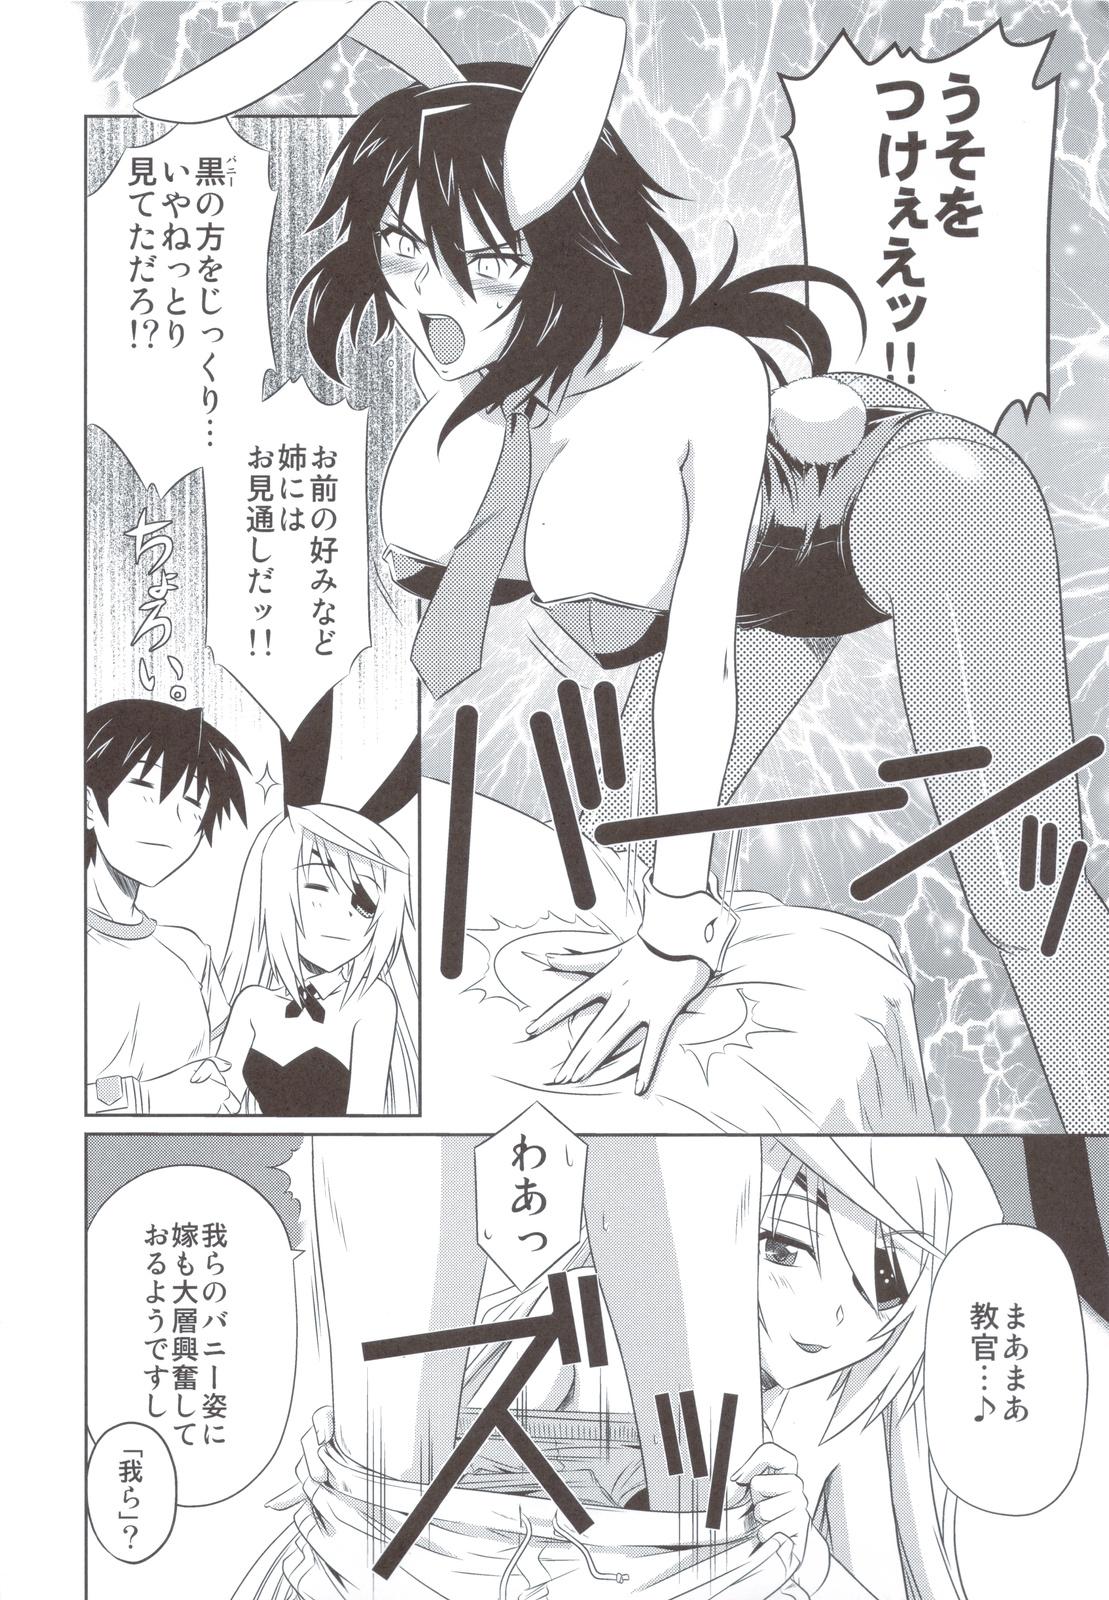 Balls is Incest Strategy 3 - Infinite stratos Pussy Licking - Page 5